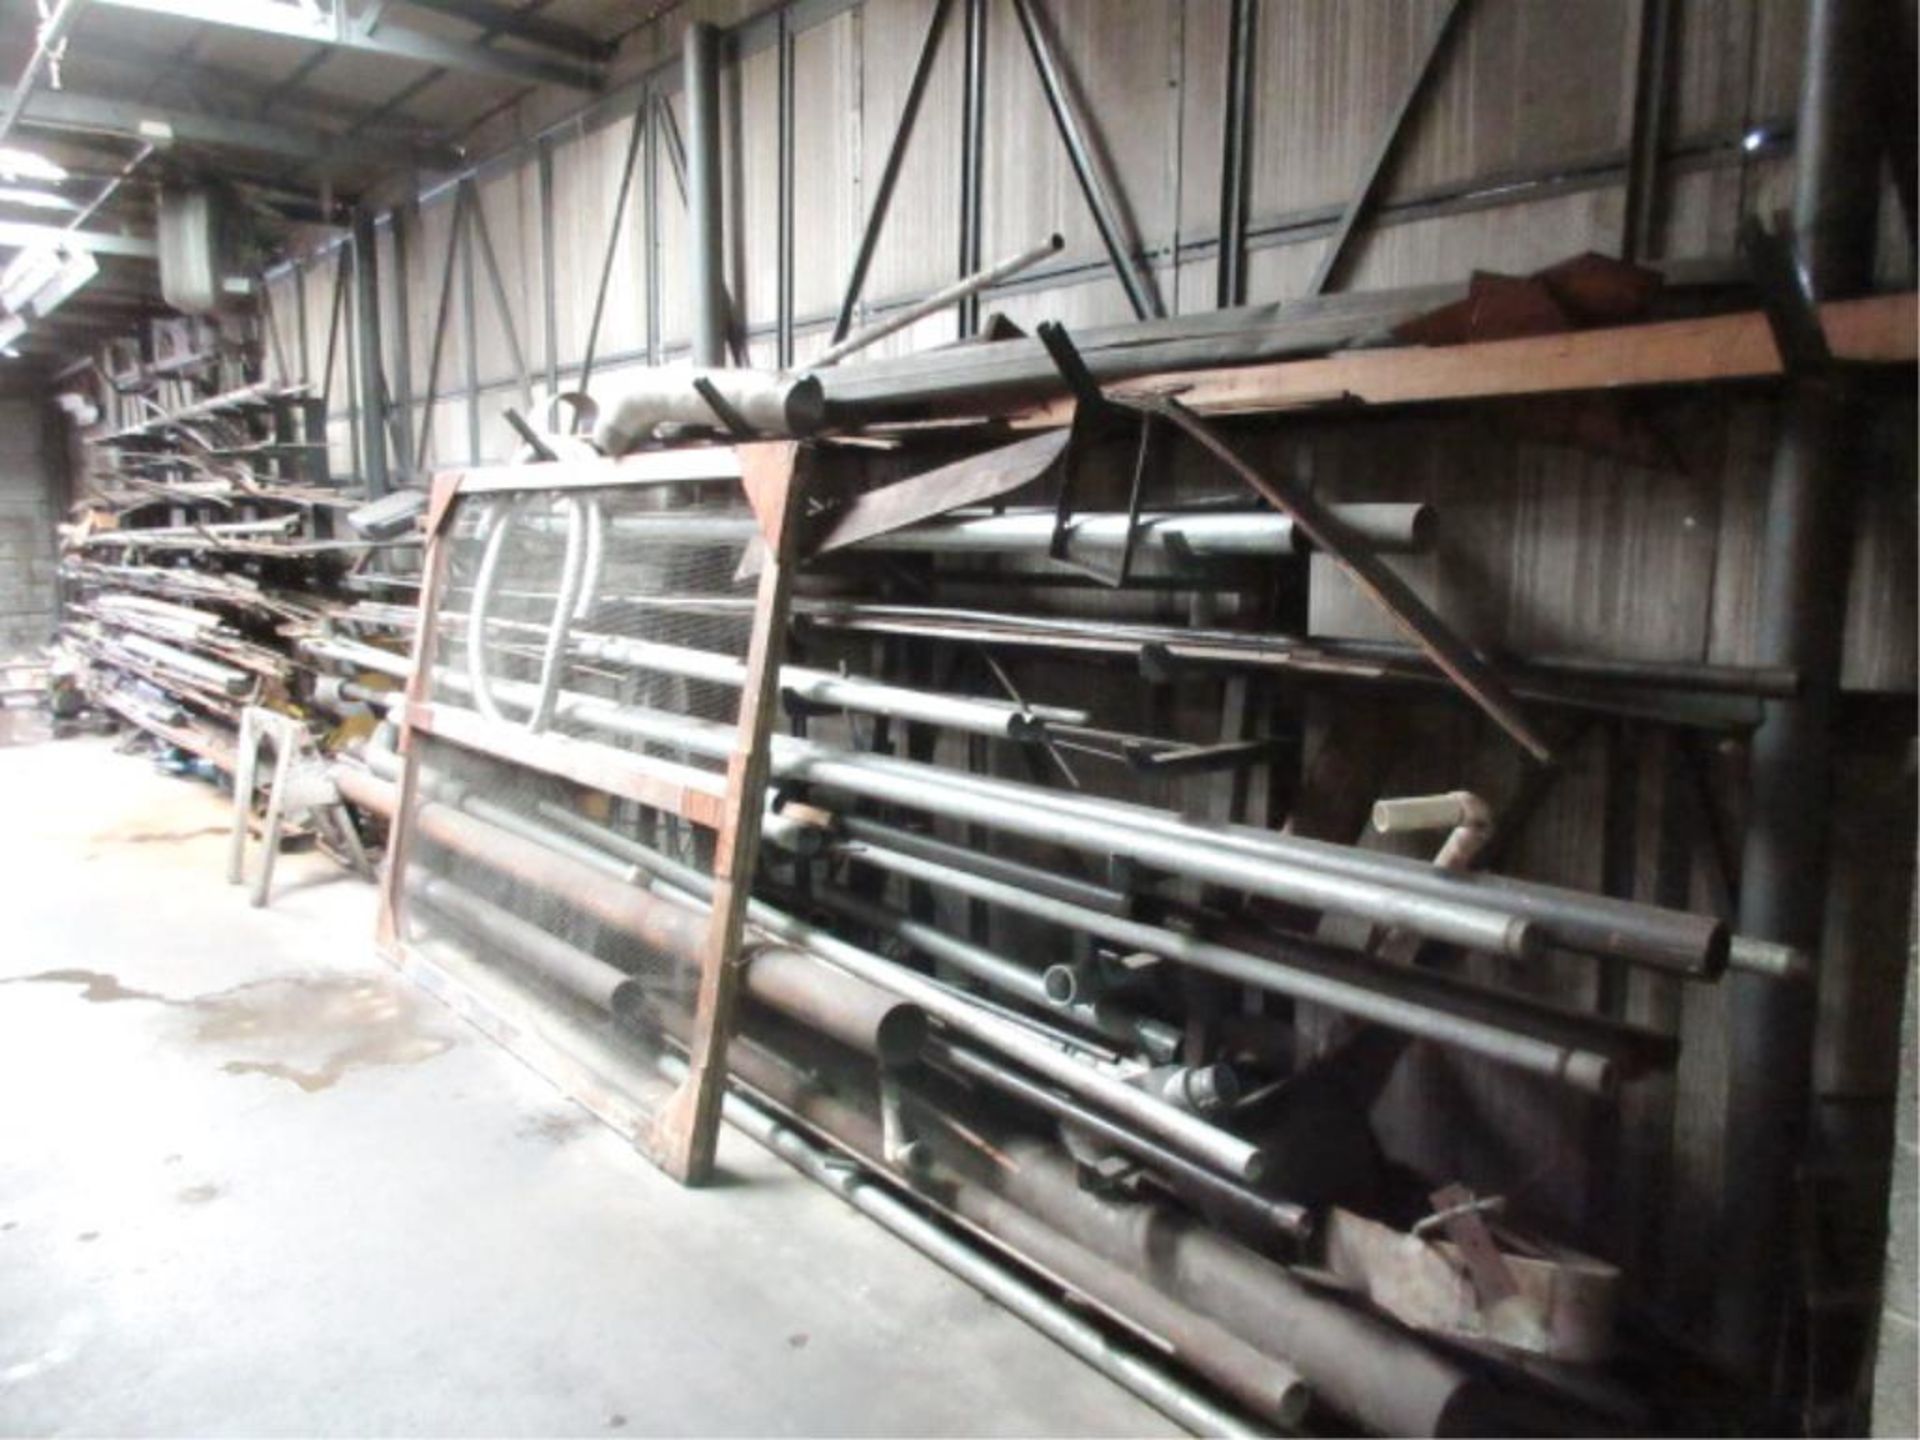 Lot Balance of Steel Contents along walls & in racks. Does not include separately tagged machinery - Image 8 of 8